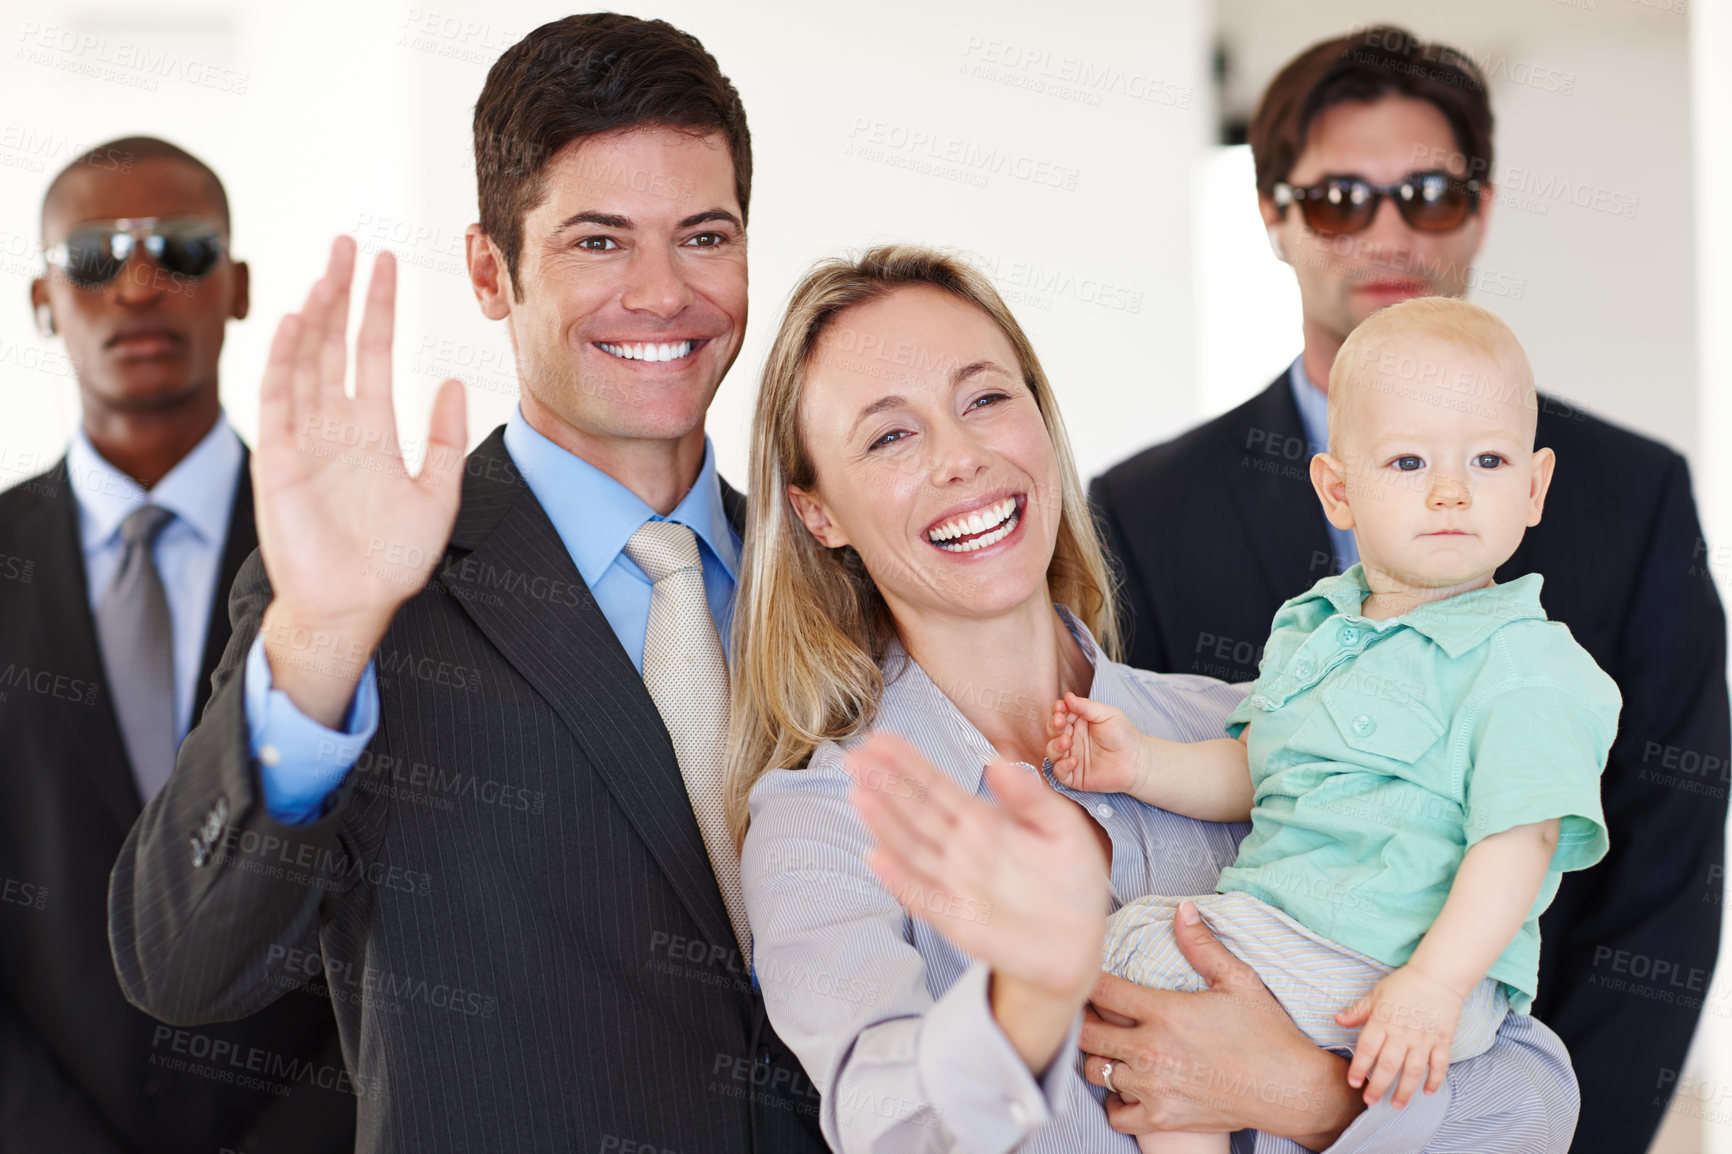 Buy stock photo Waving, politician and couple with security at legal conference for political decision with crowd and fame. Leader or representative with guard and family with baby for alert and protect in public 